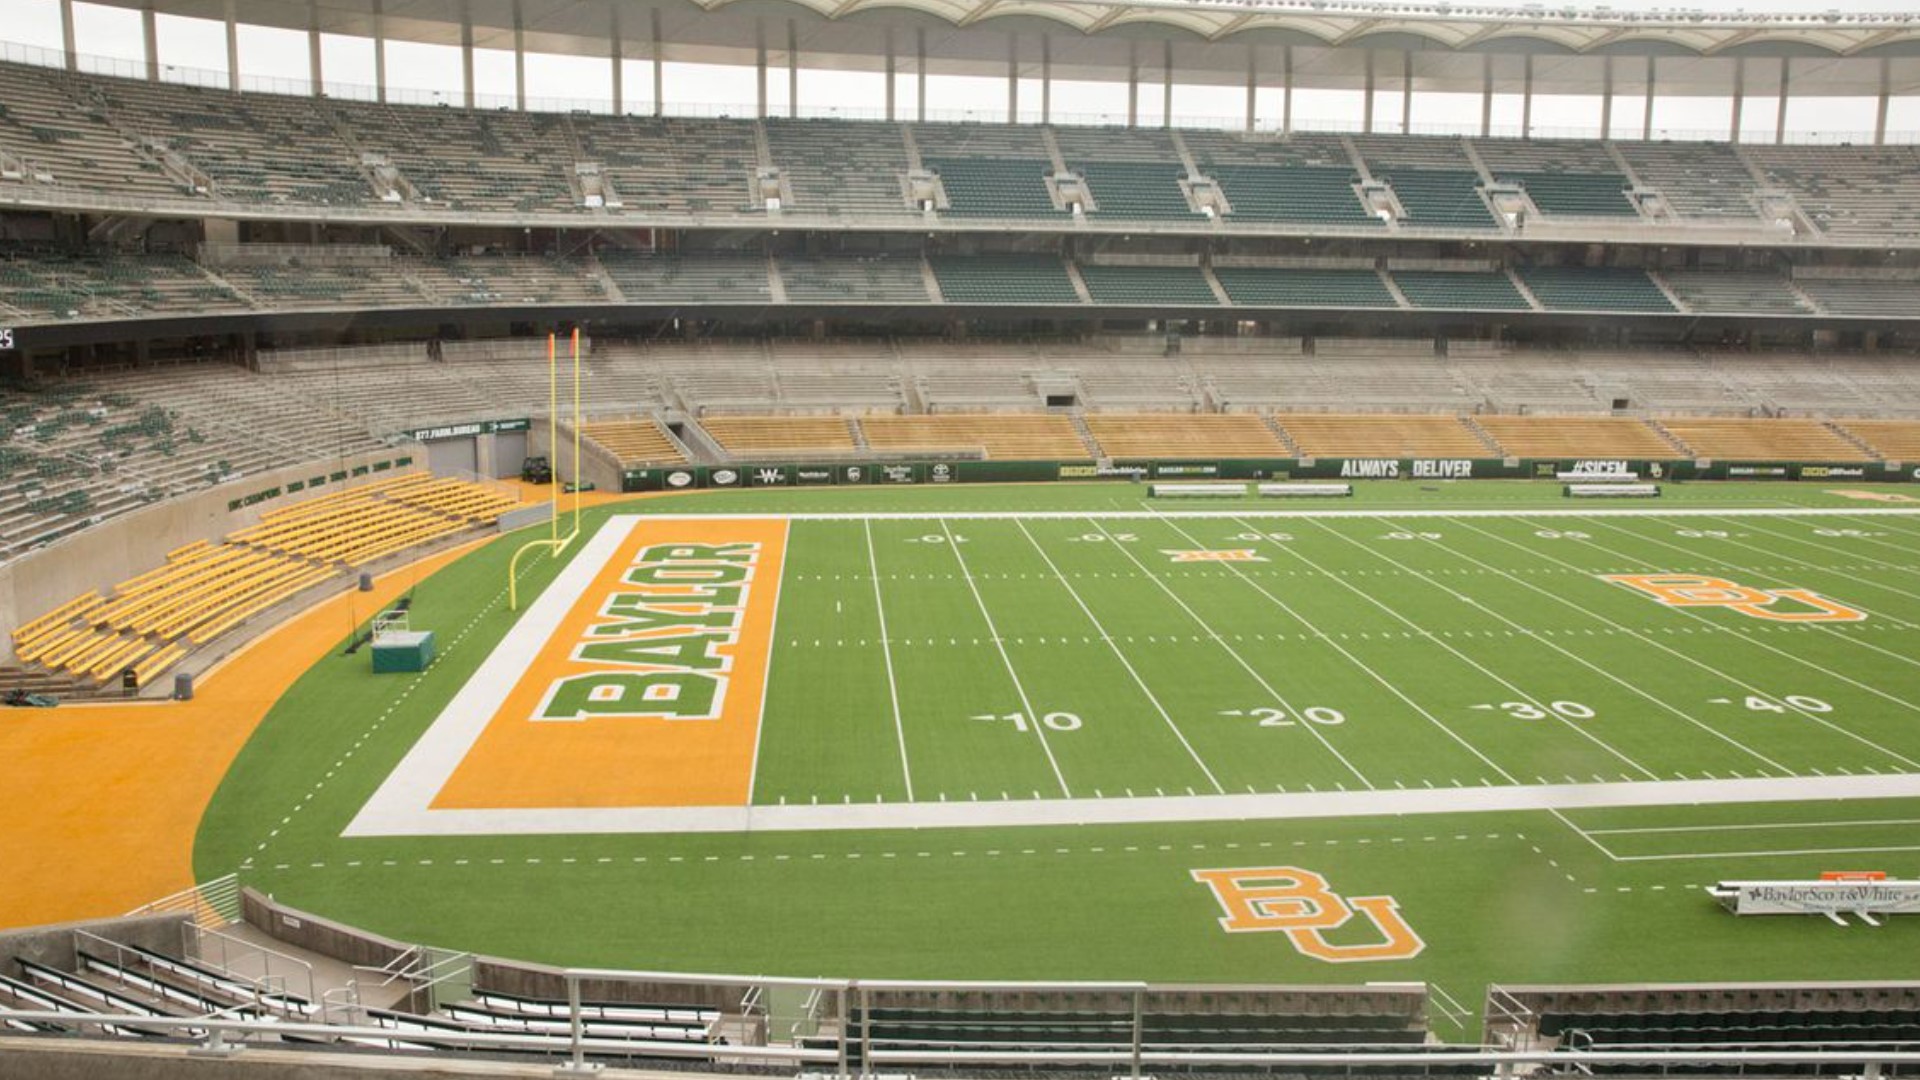 The committee found while Baylor did not violate rules about reporting sexual violence, they did find other violations leading to four years of probation.